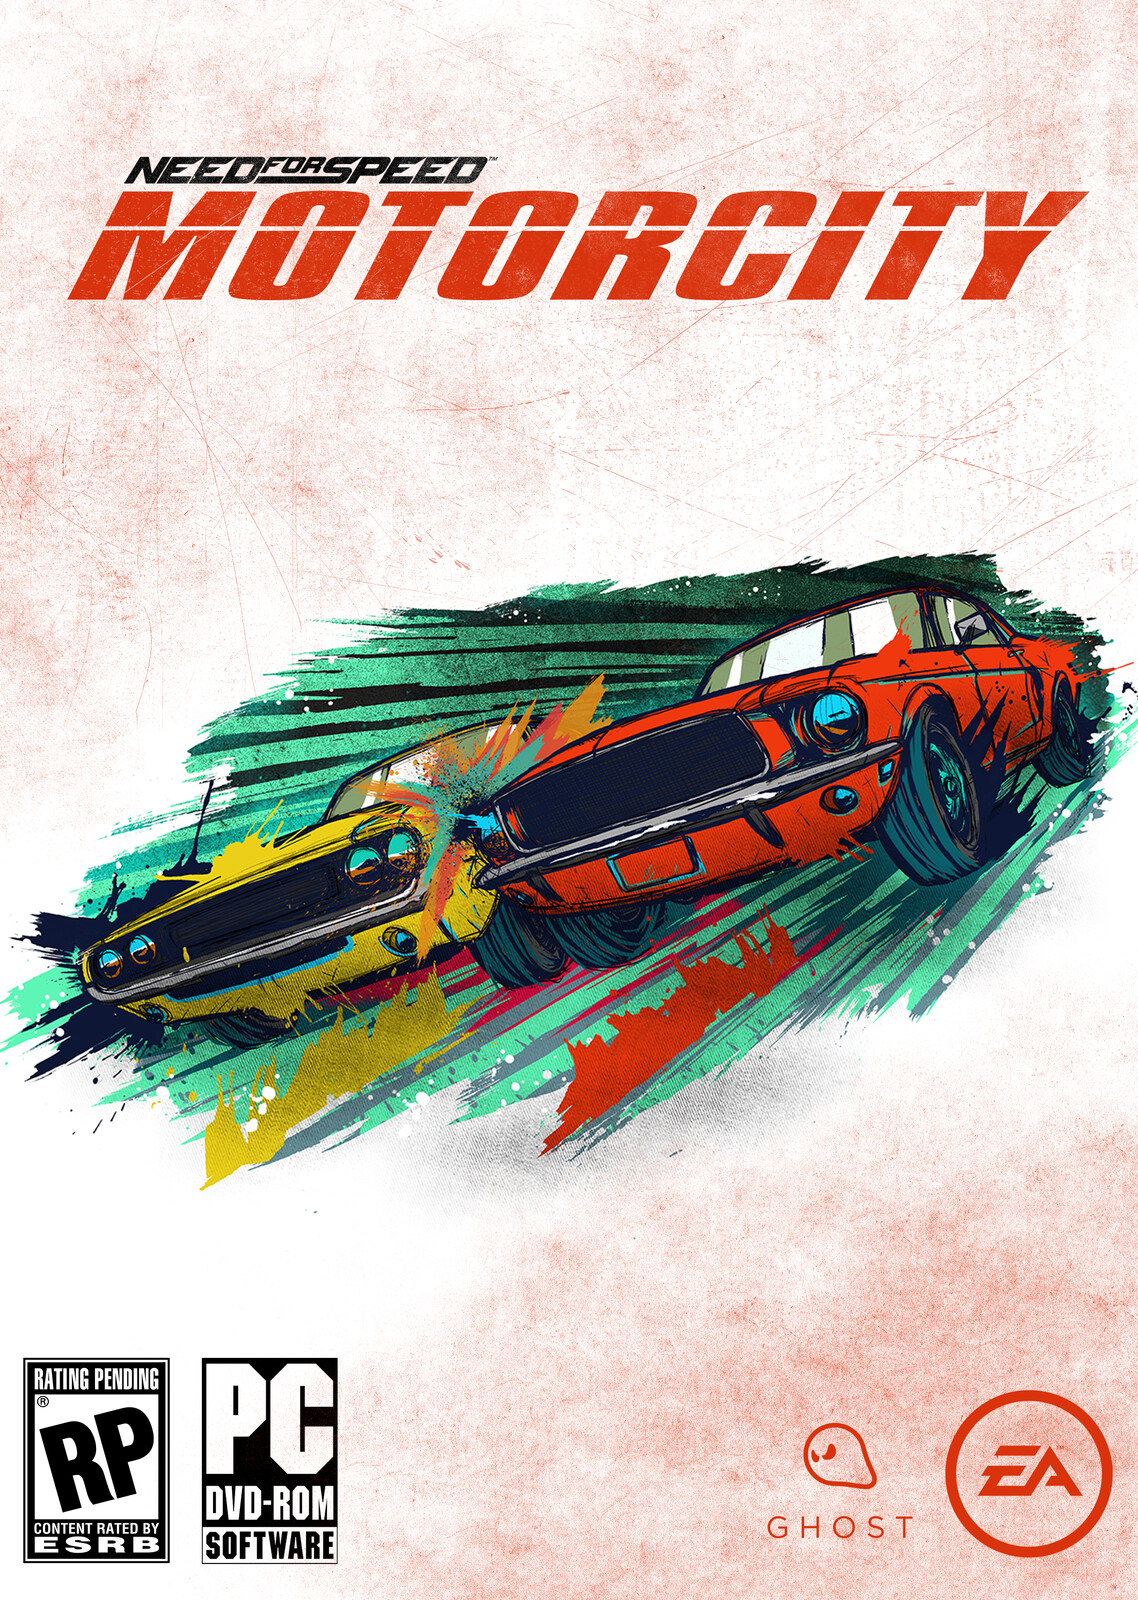 Need for Speed Motorcity (Stencil Cover - Original Idea)